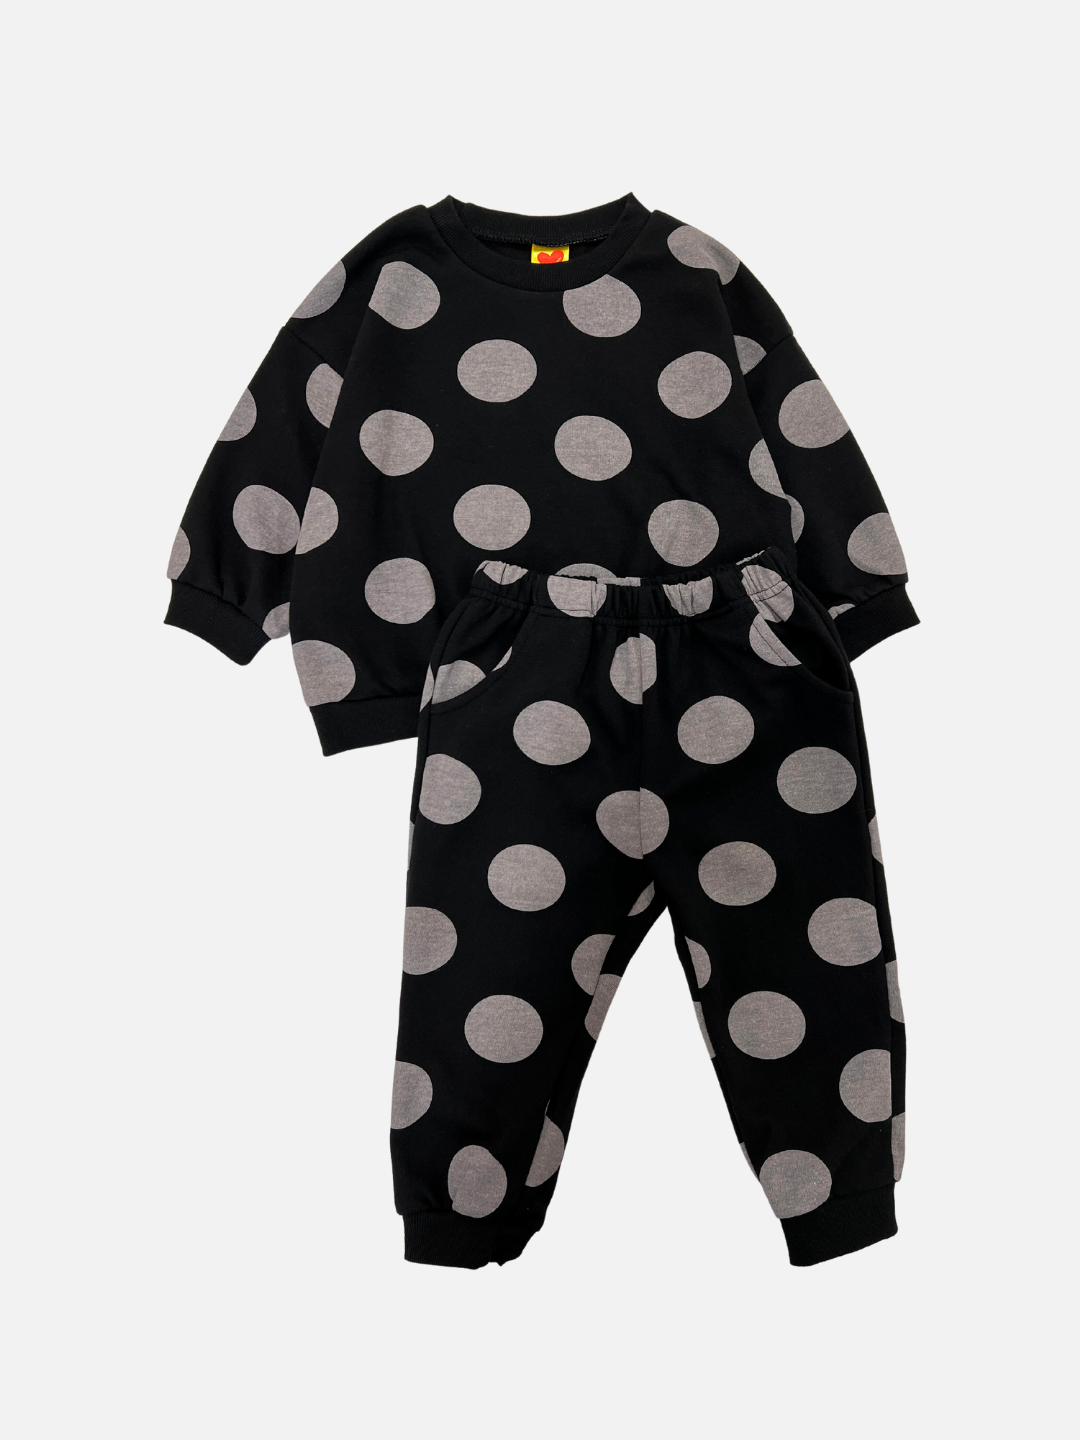 Front view of a kids sweat set in black with large grey polka dots. The set consists of a crewneck sweatshirt and a matching sweatpant.